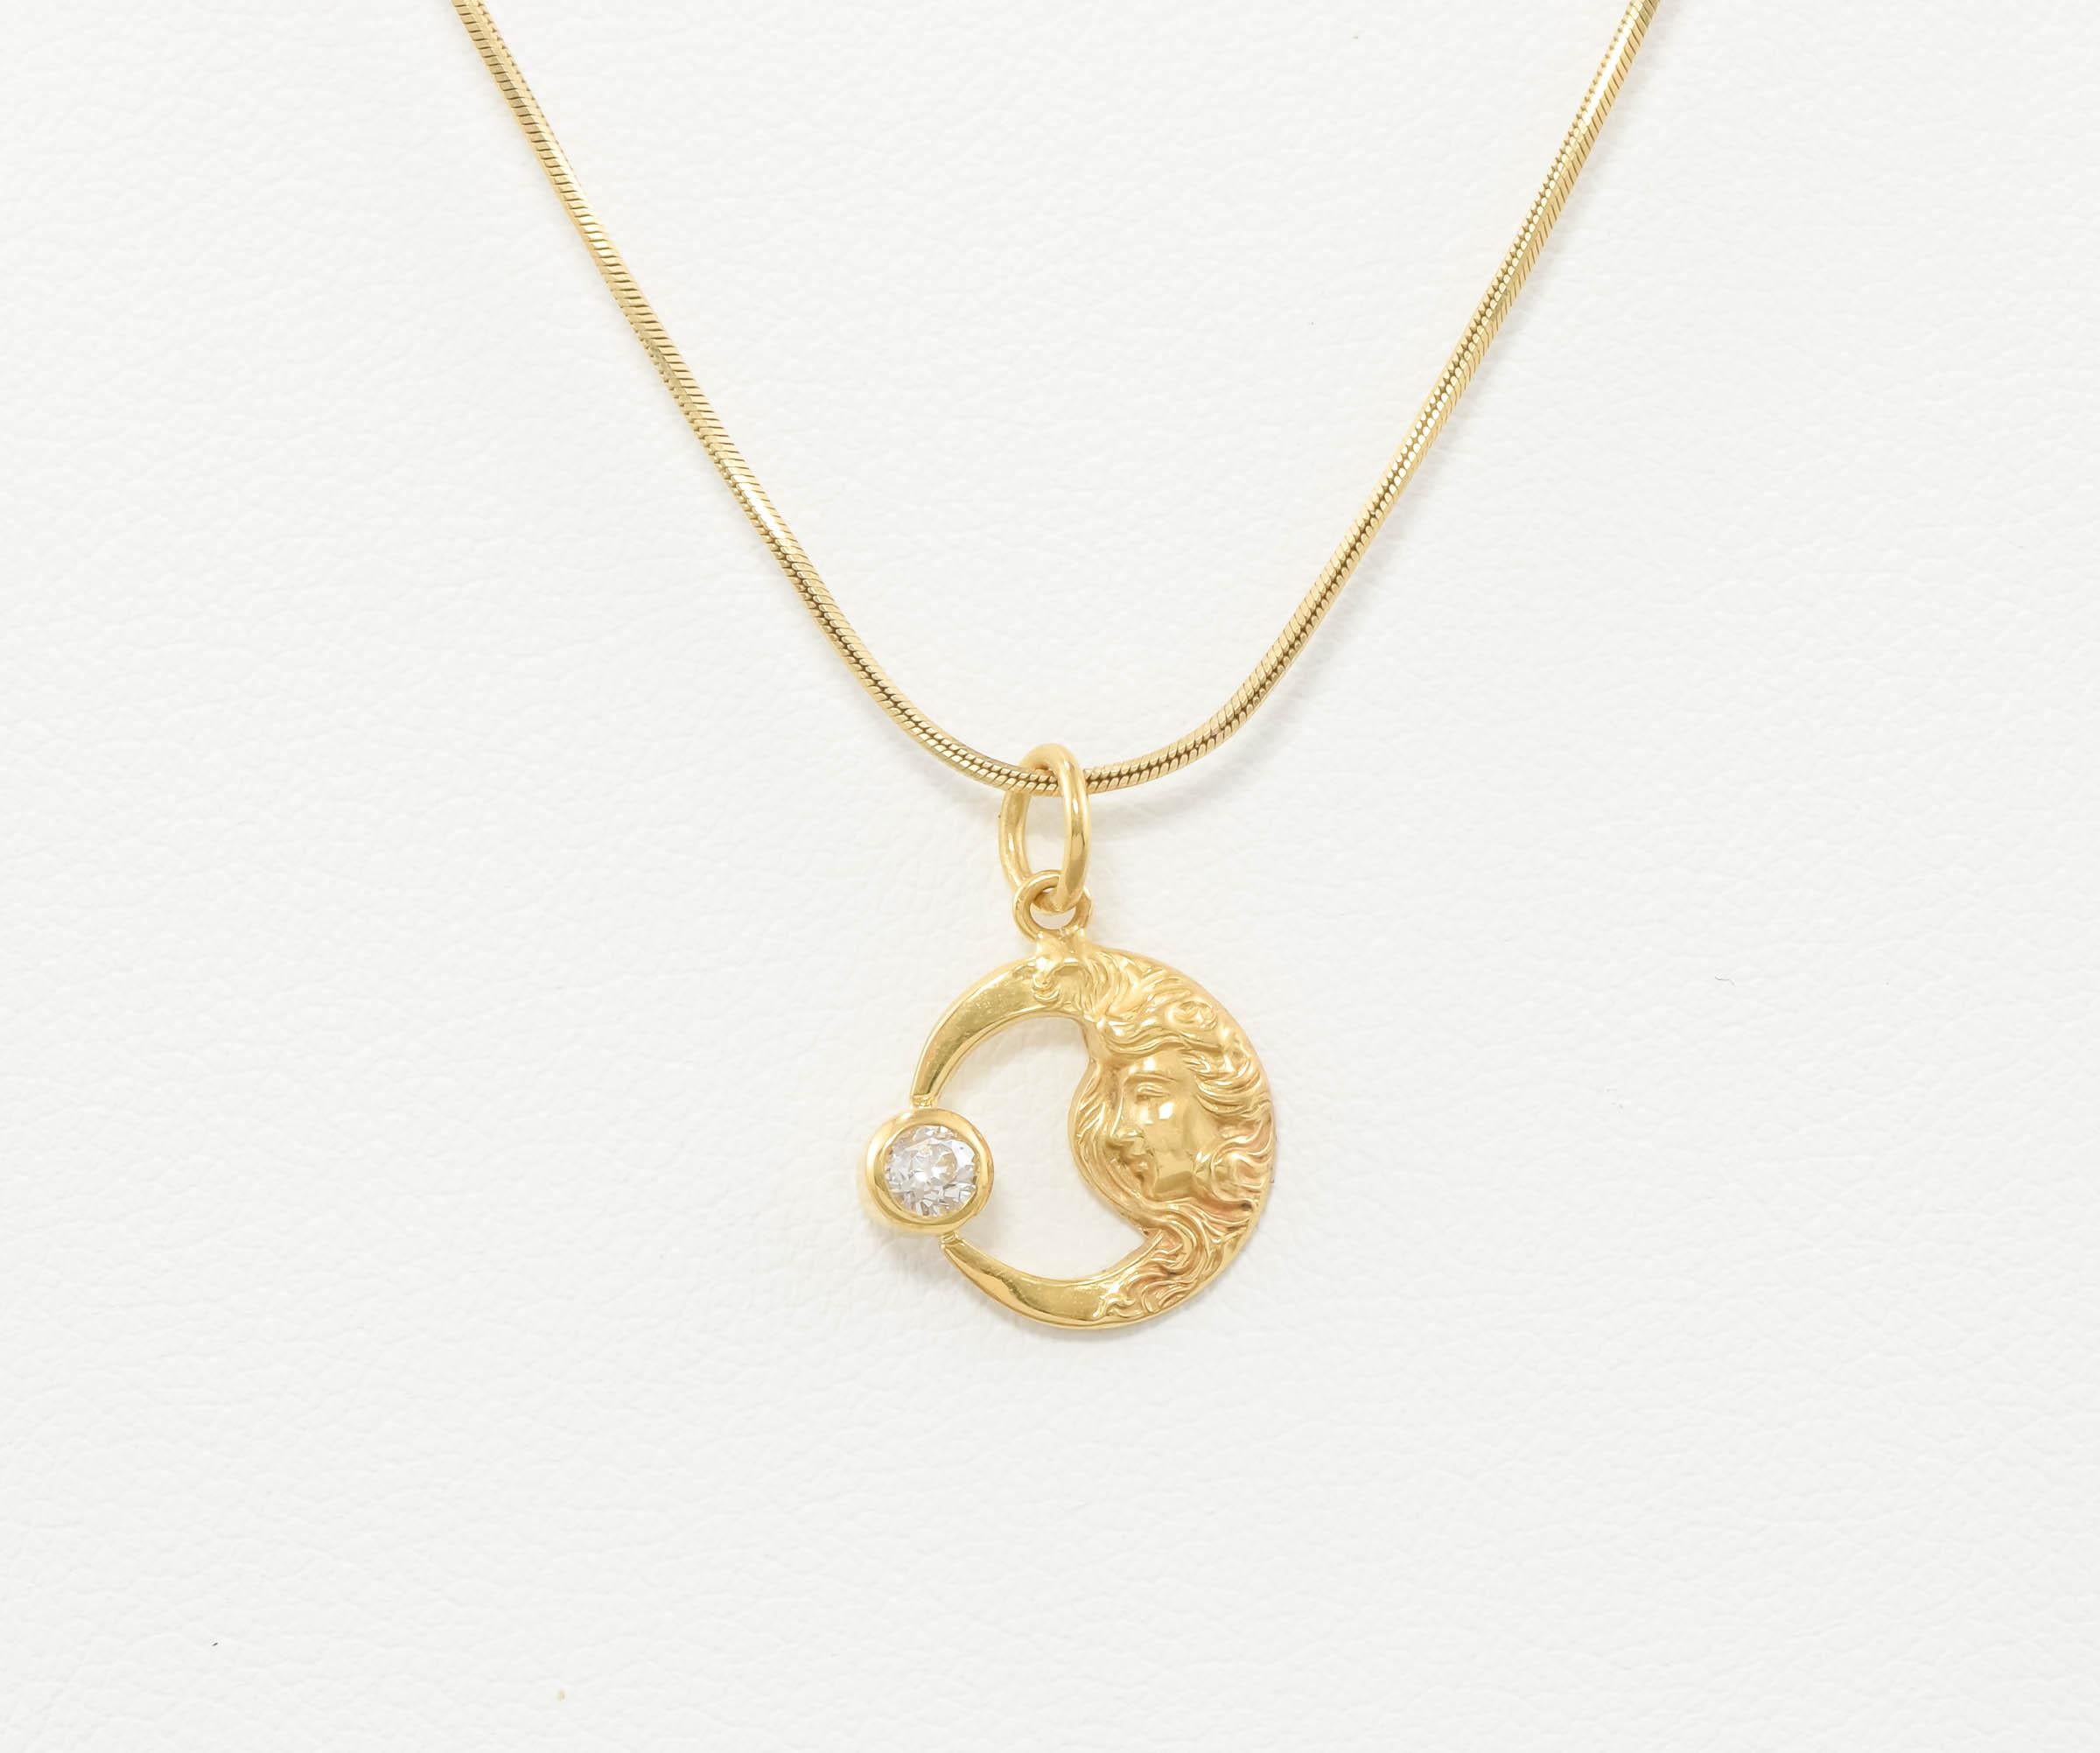 Tiny Gold Celestial Charm Necklace - Art Nouveau 'Lady in the Moon' with Diamond For Sale 5